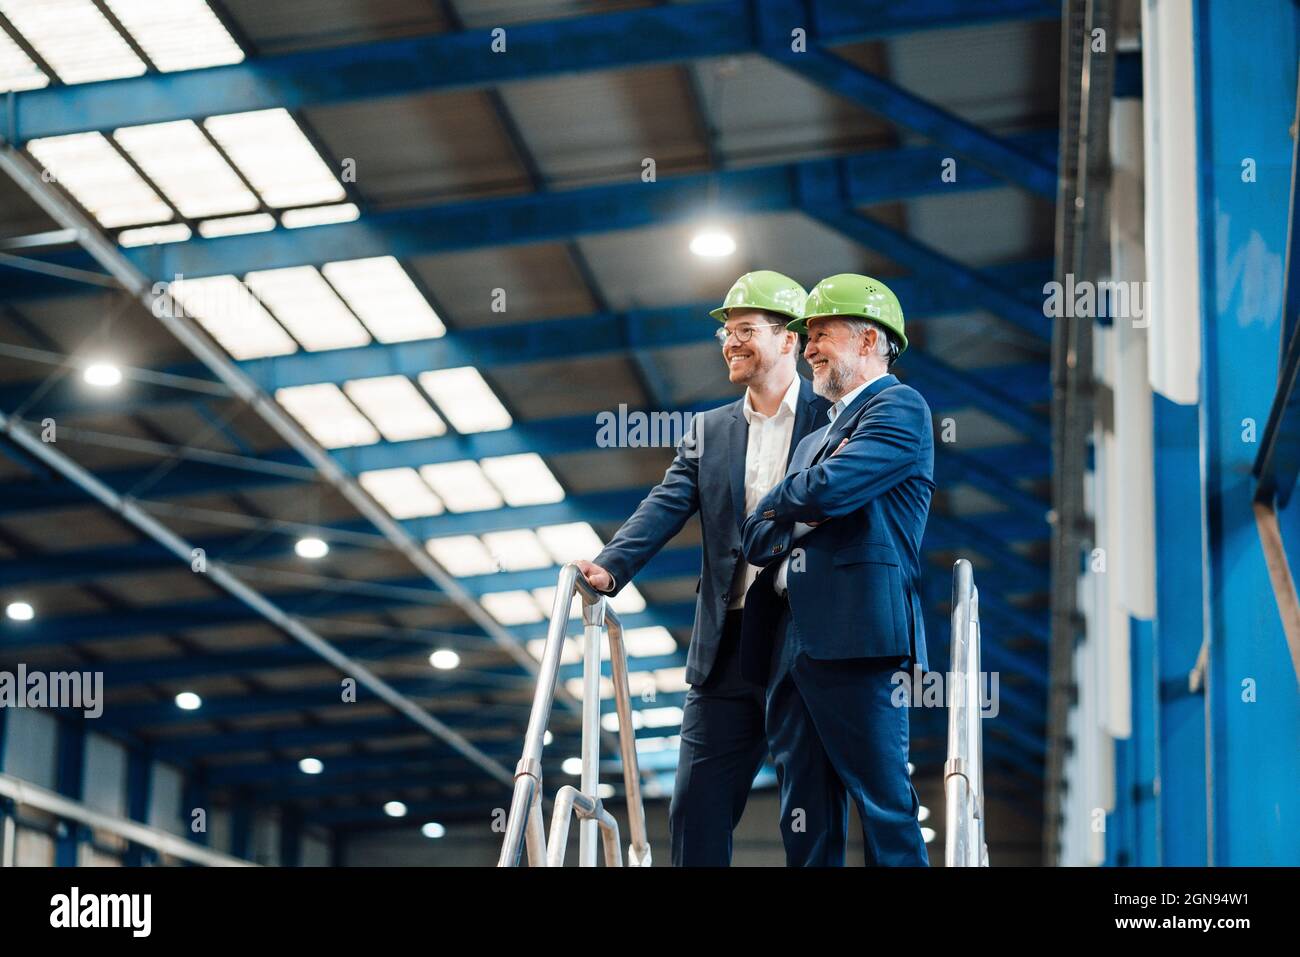 Male managing directors with hardhat standing in factory Stock Photo